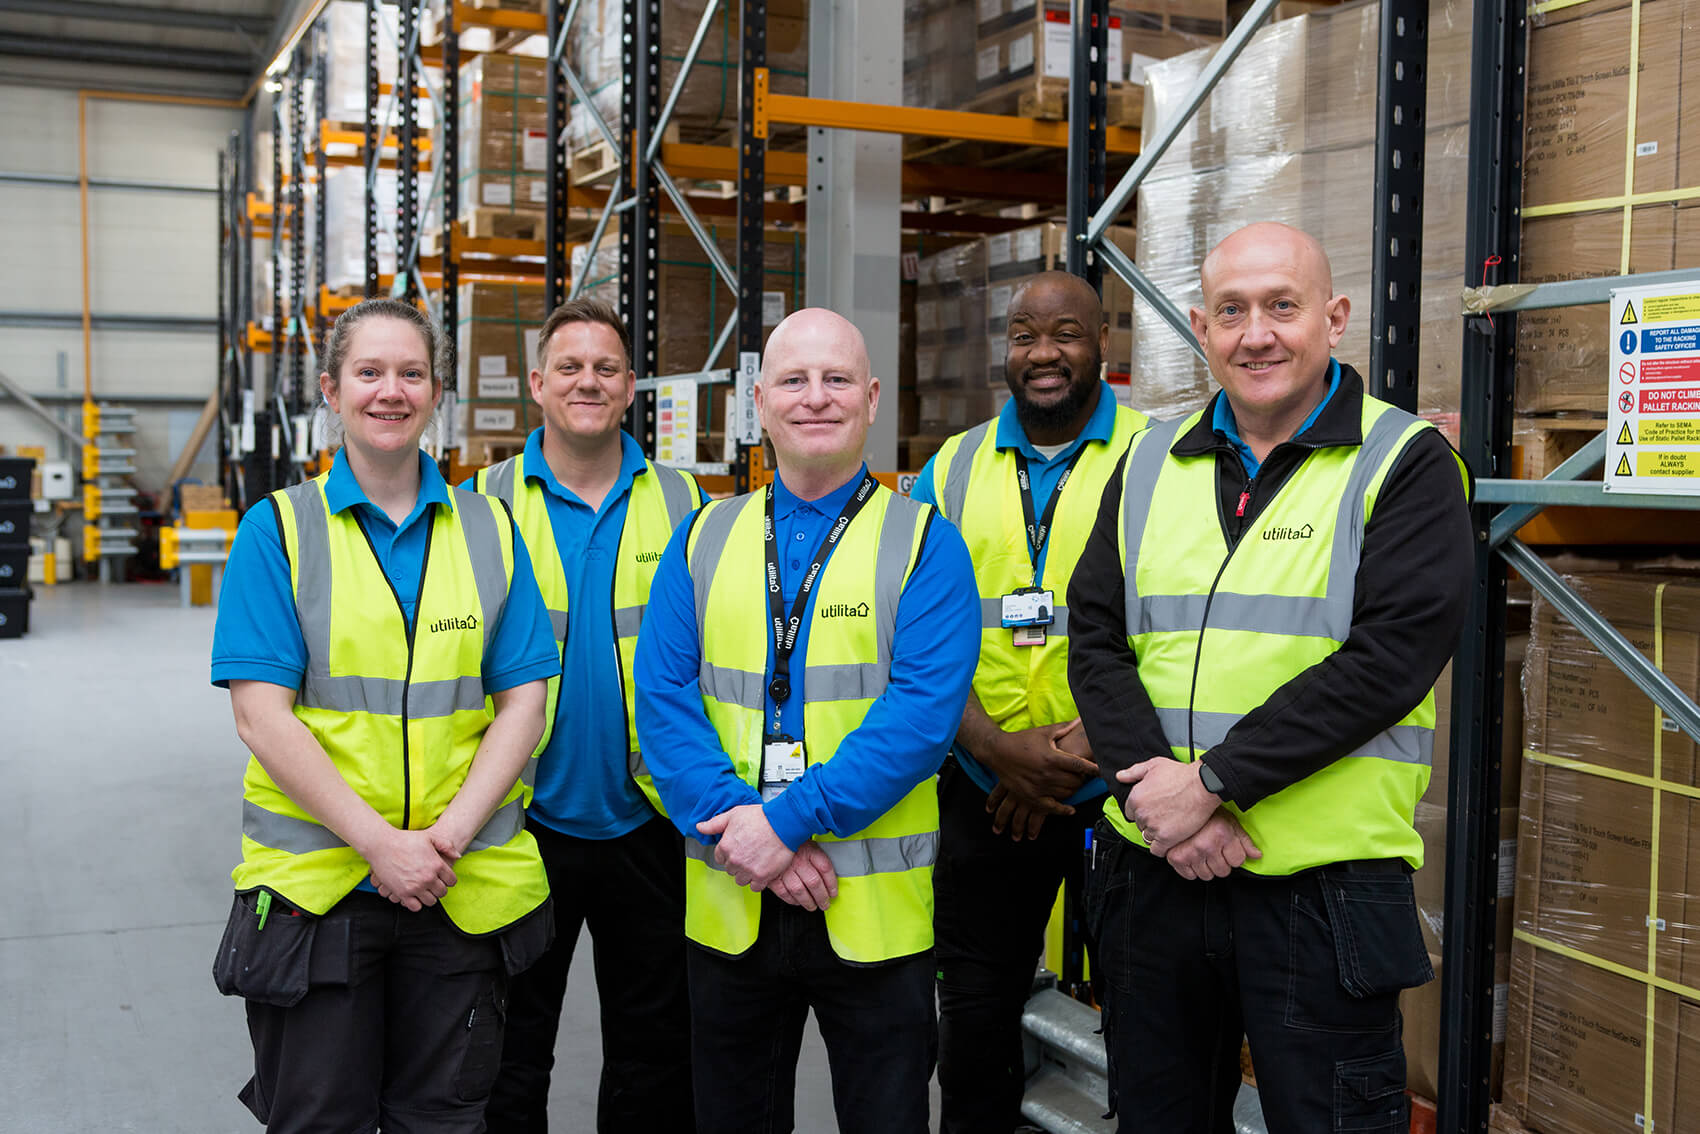 Five people in high-vis jackets smiling in a warehouse